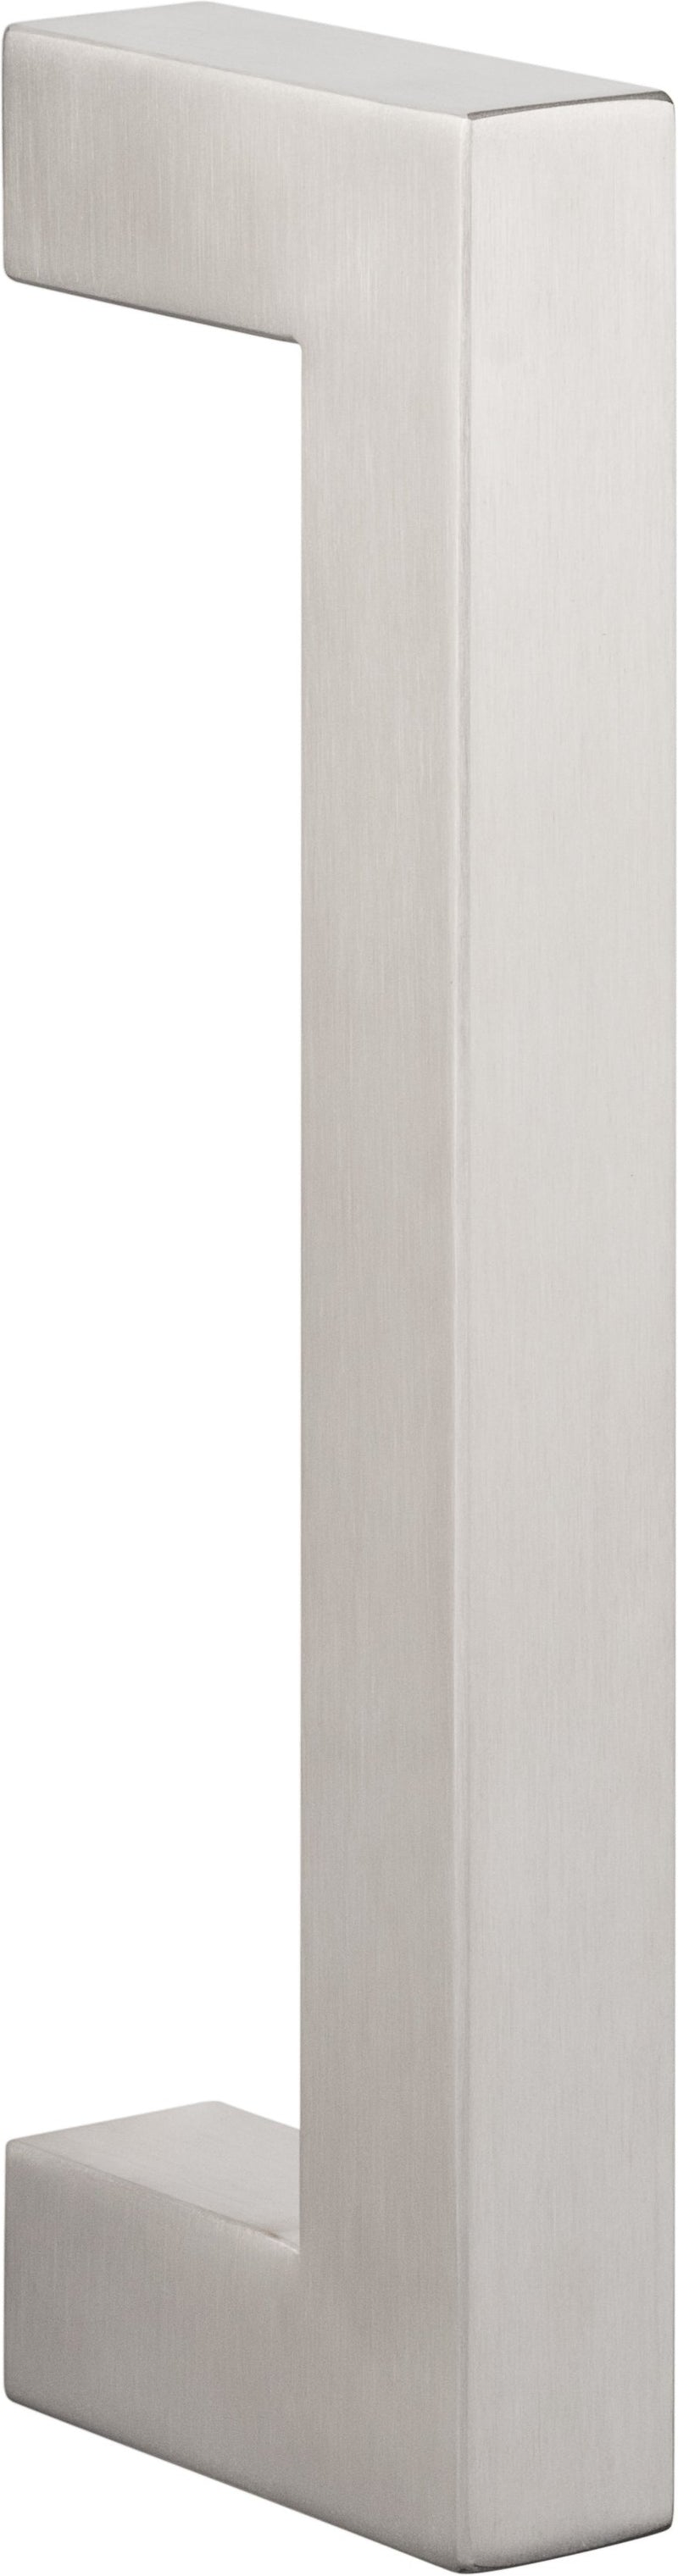 Sure-Loc Barn Door Handle, 8", Square, Single Sided in Satin Stainless Steel finish